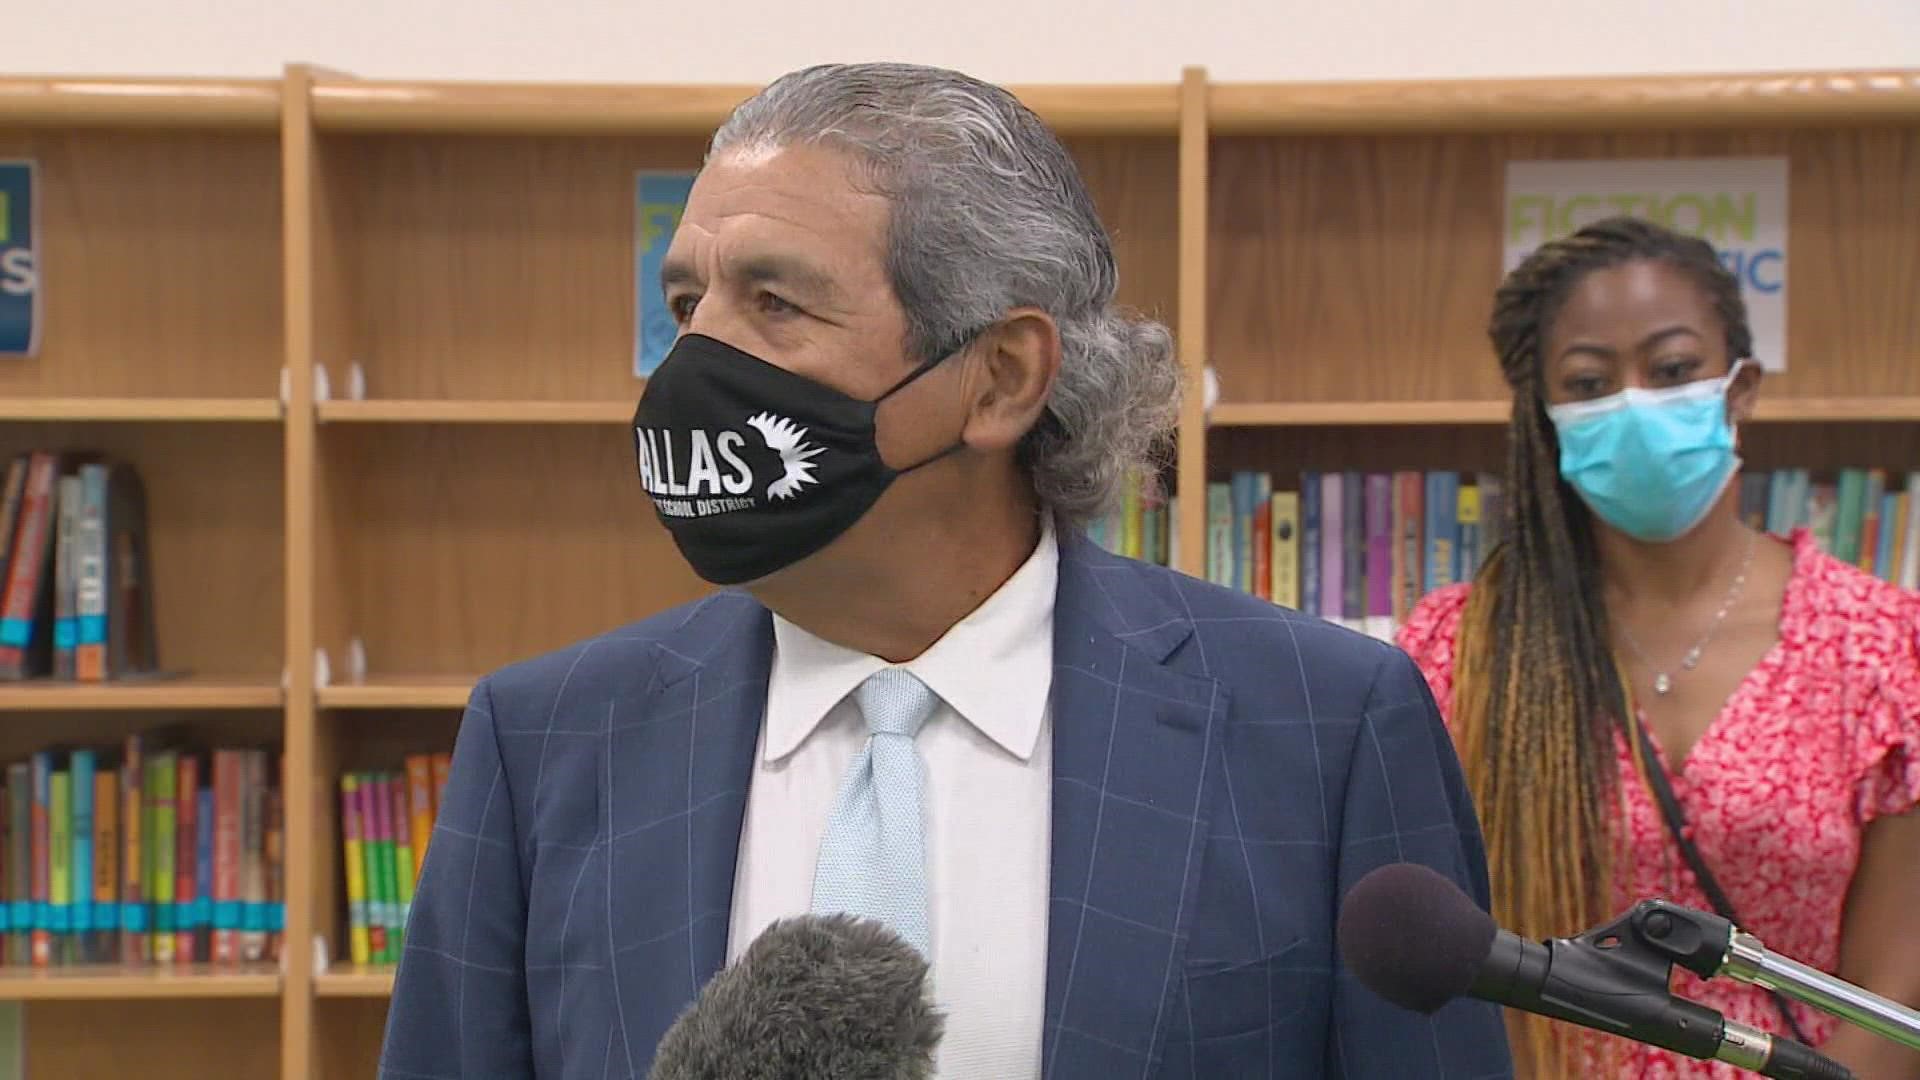 Dr. Hinojosa said staff are going to ask students to comply, and will give them a mask and time. If they don't comply, they will be sent to a separate area.